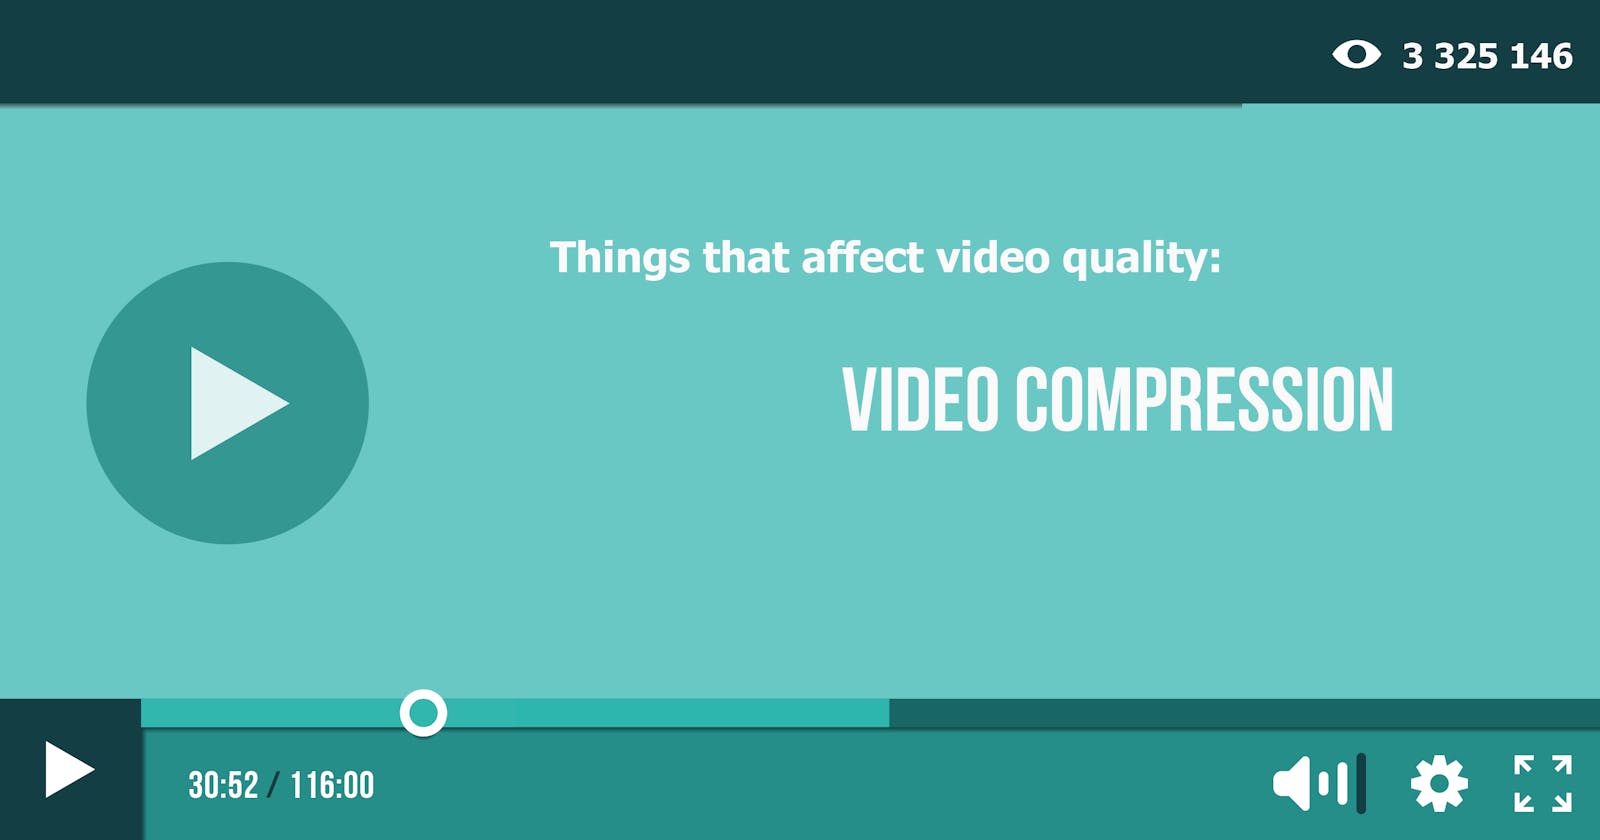 Things that affect video quality: Video compression